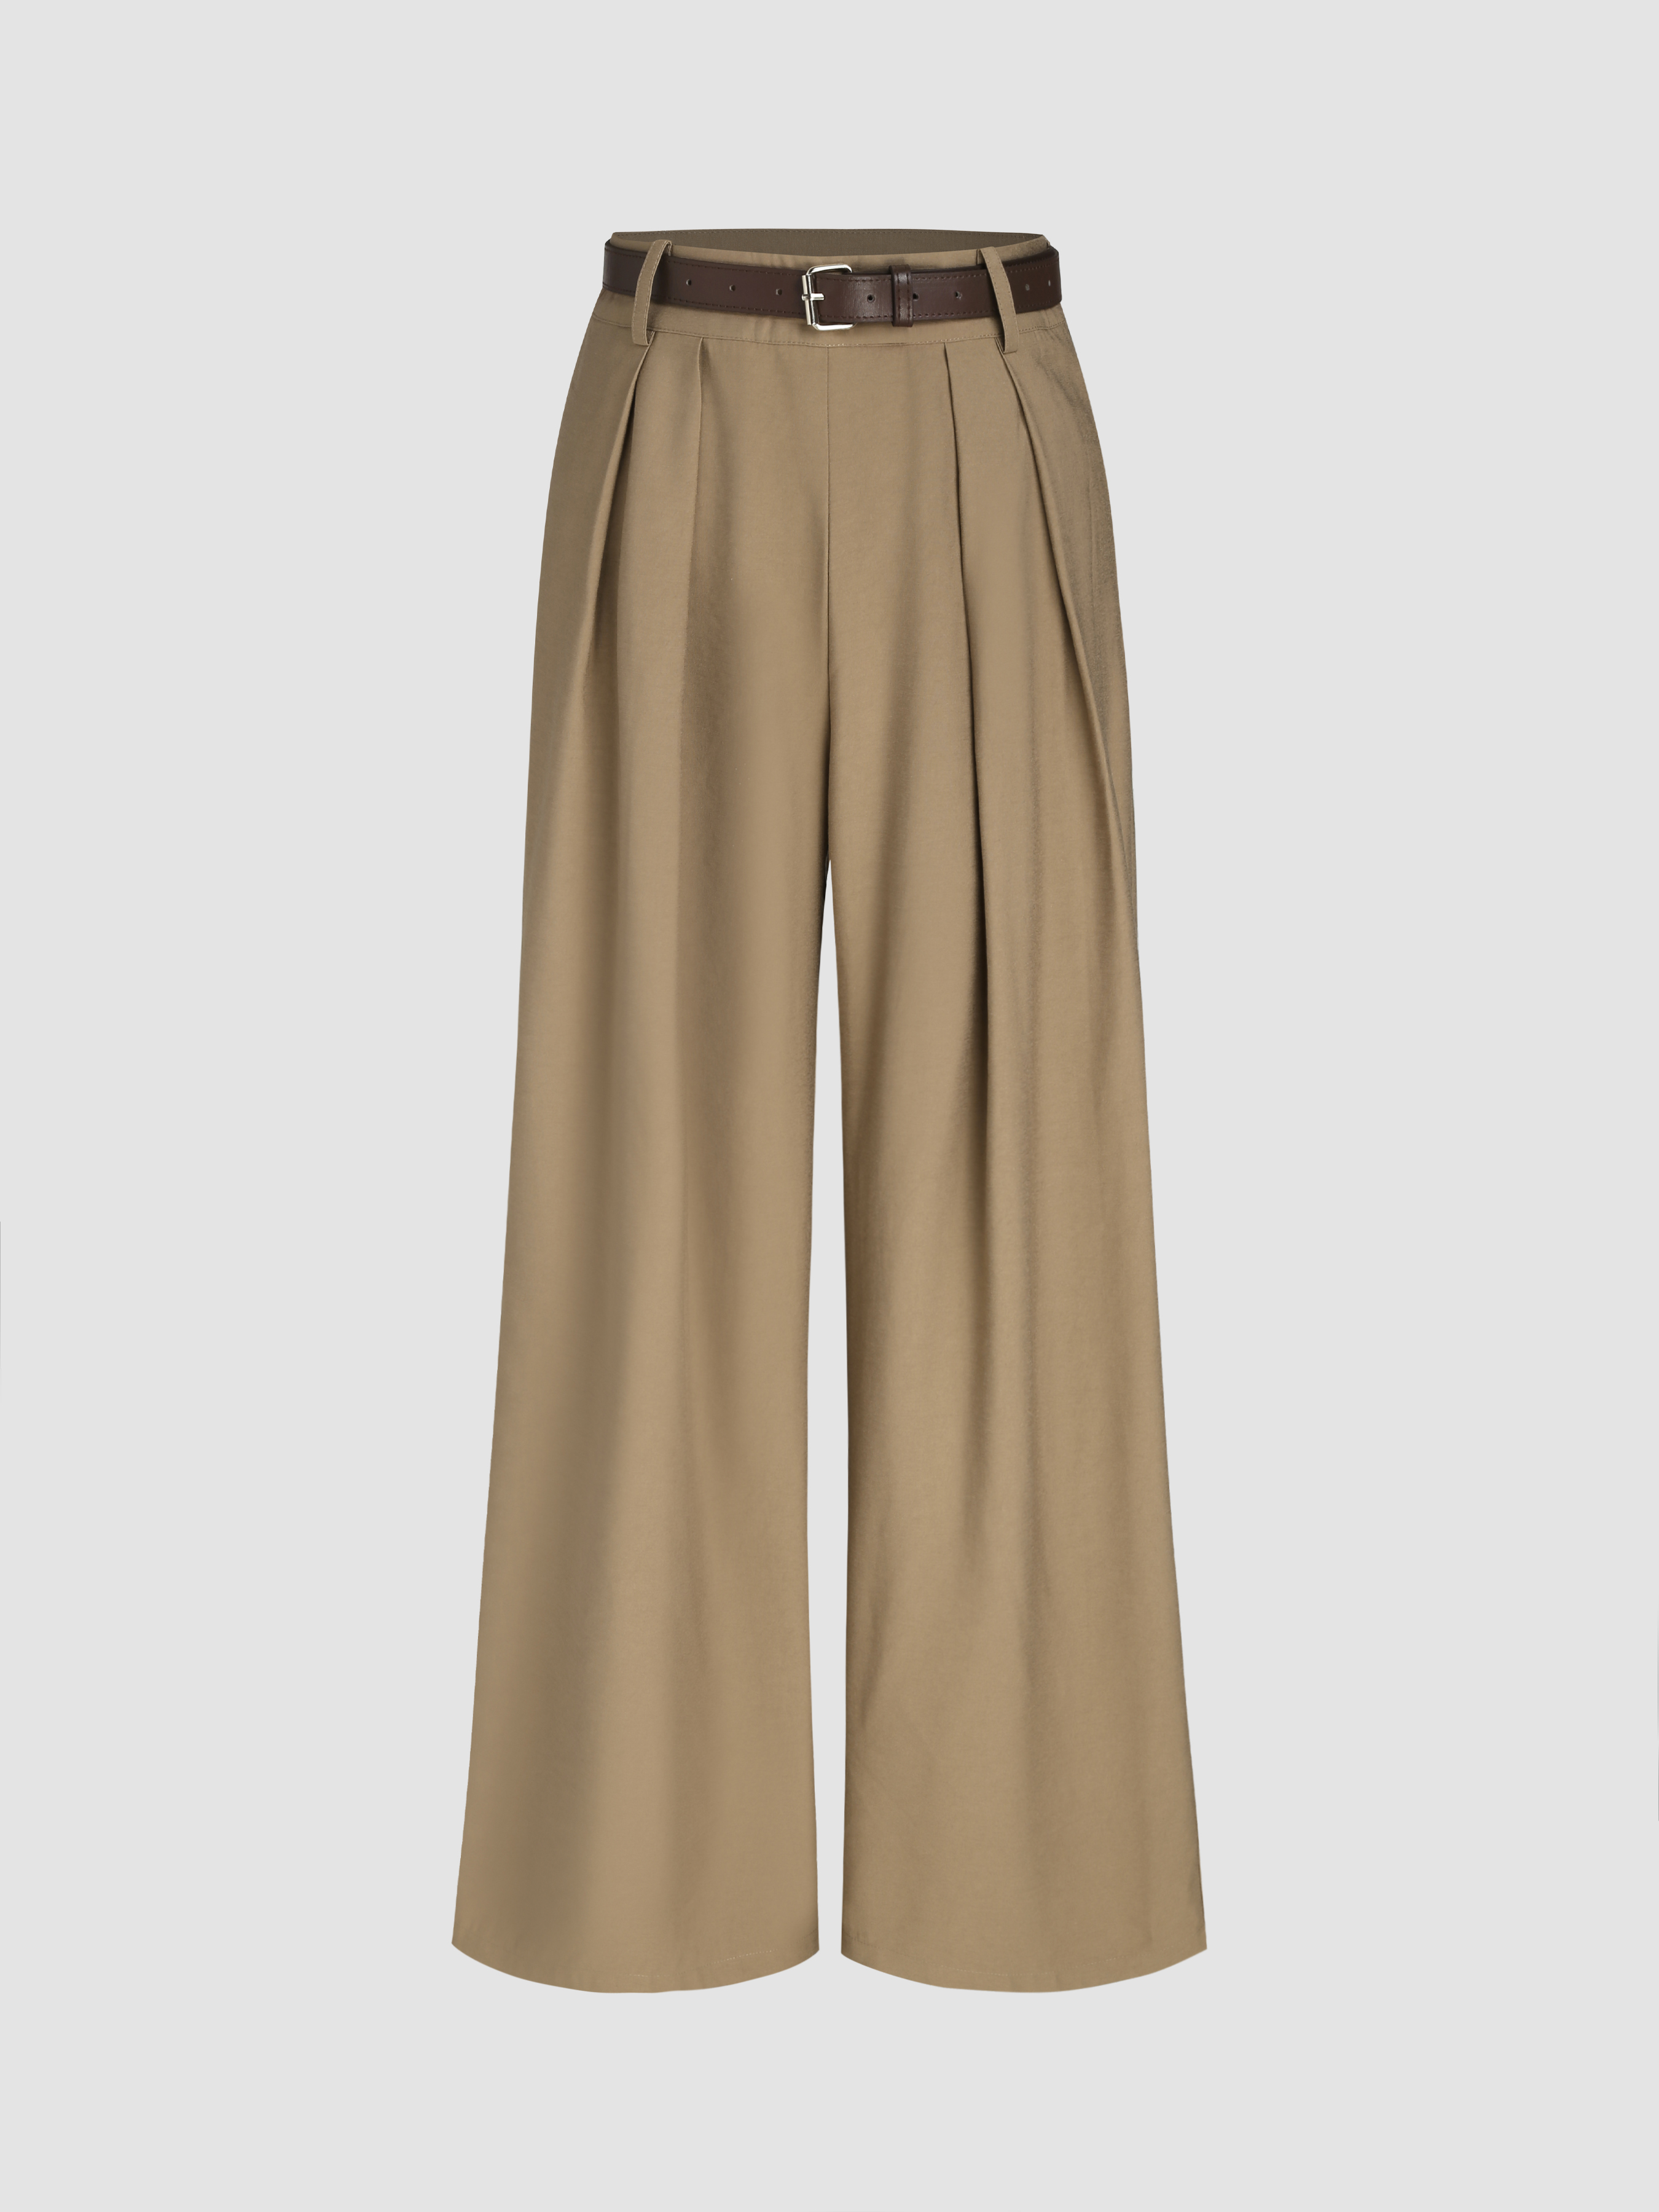 Busy Belted Straight Leg Trouser - Cider